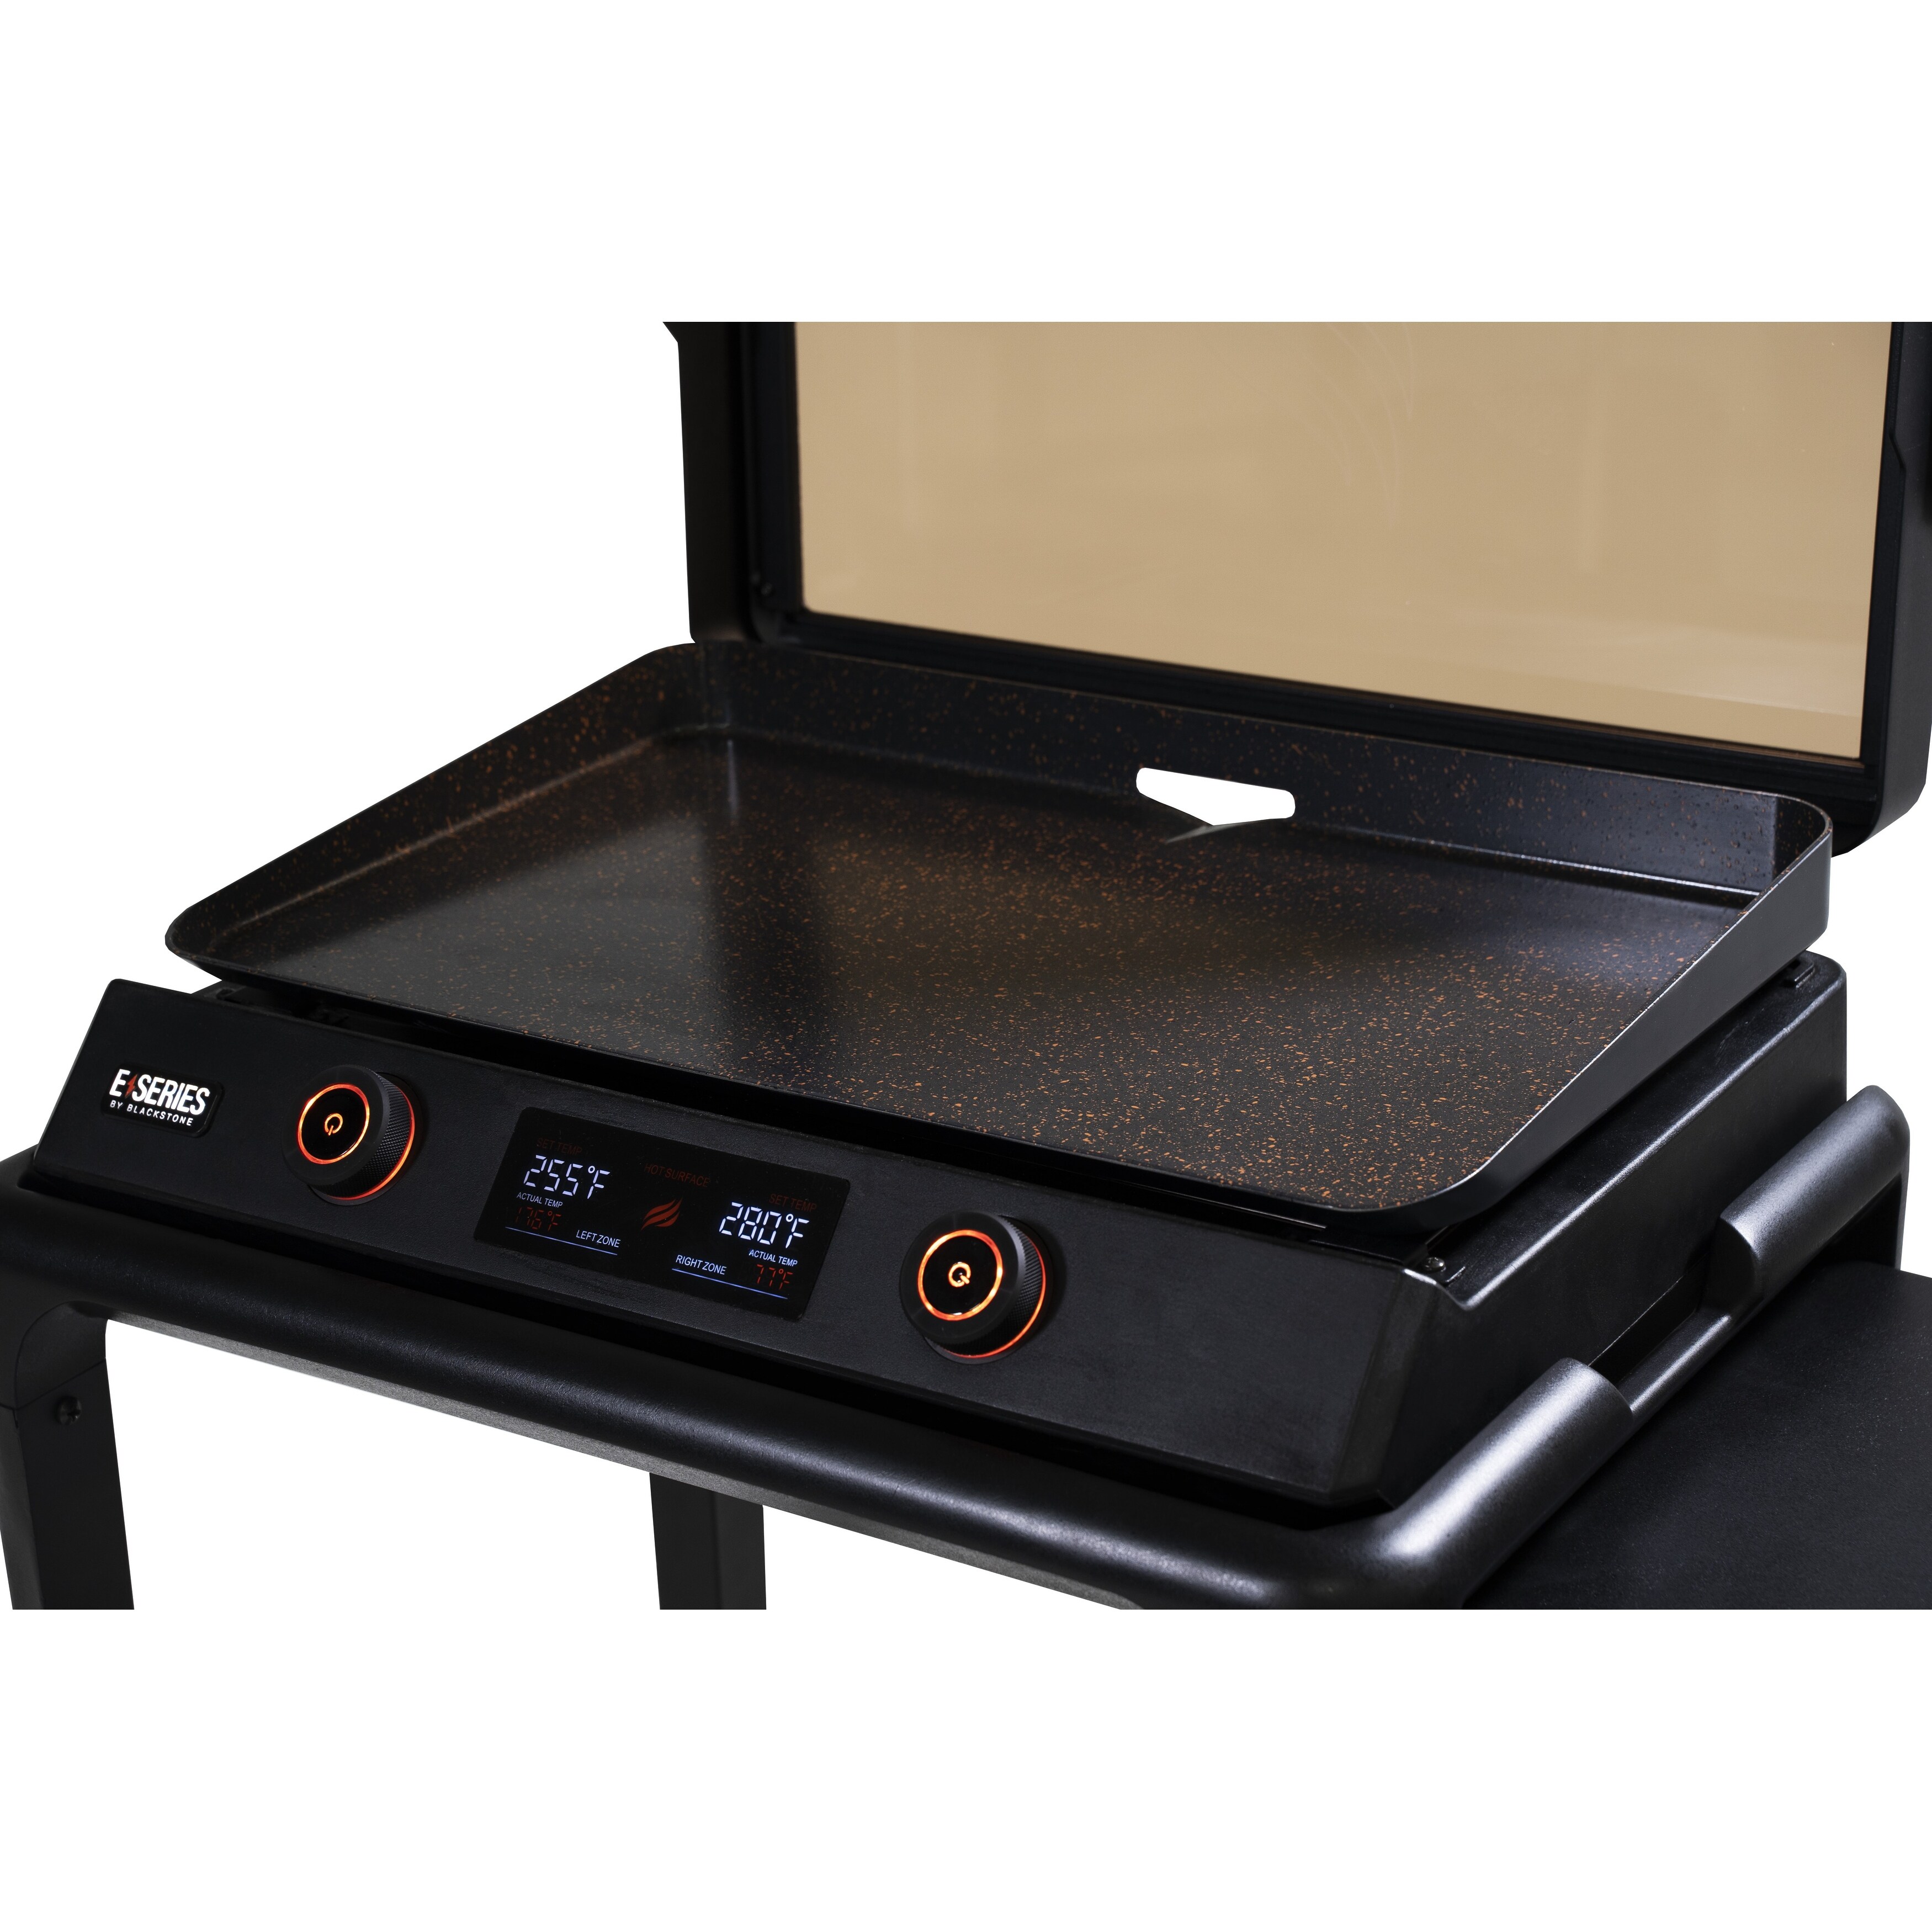 https://ak1.ostkcdn.com/images/products/is/images/direct/35f3a3c222990ee4934487a7ccb983c82b5366fb/E-Series-22%22-Electric-Tabletop-Griddle-with-Prep-Cart.jpg